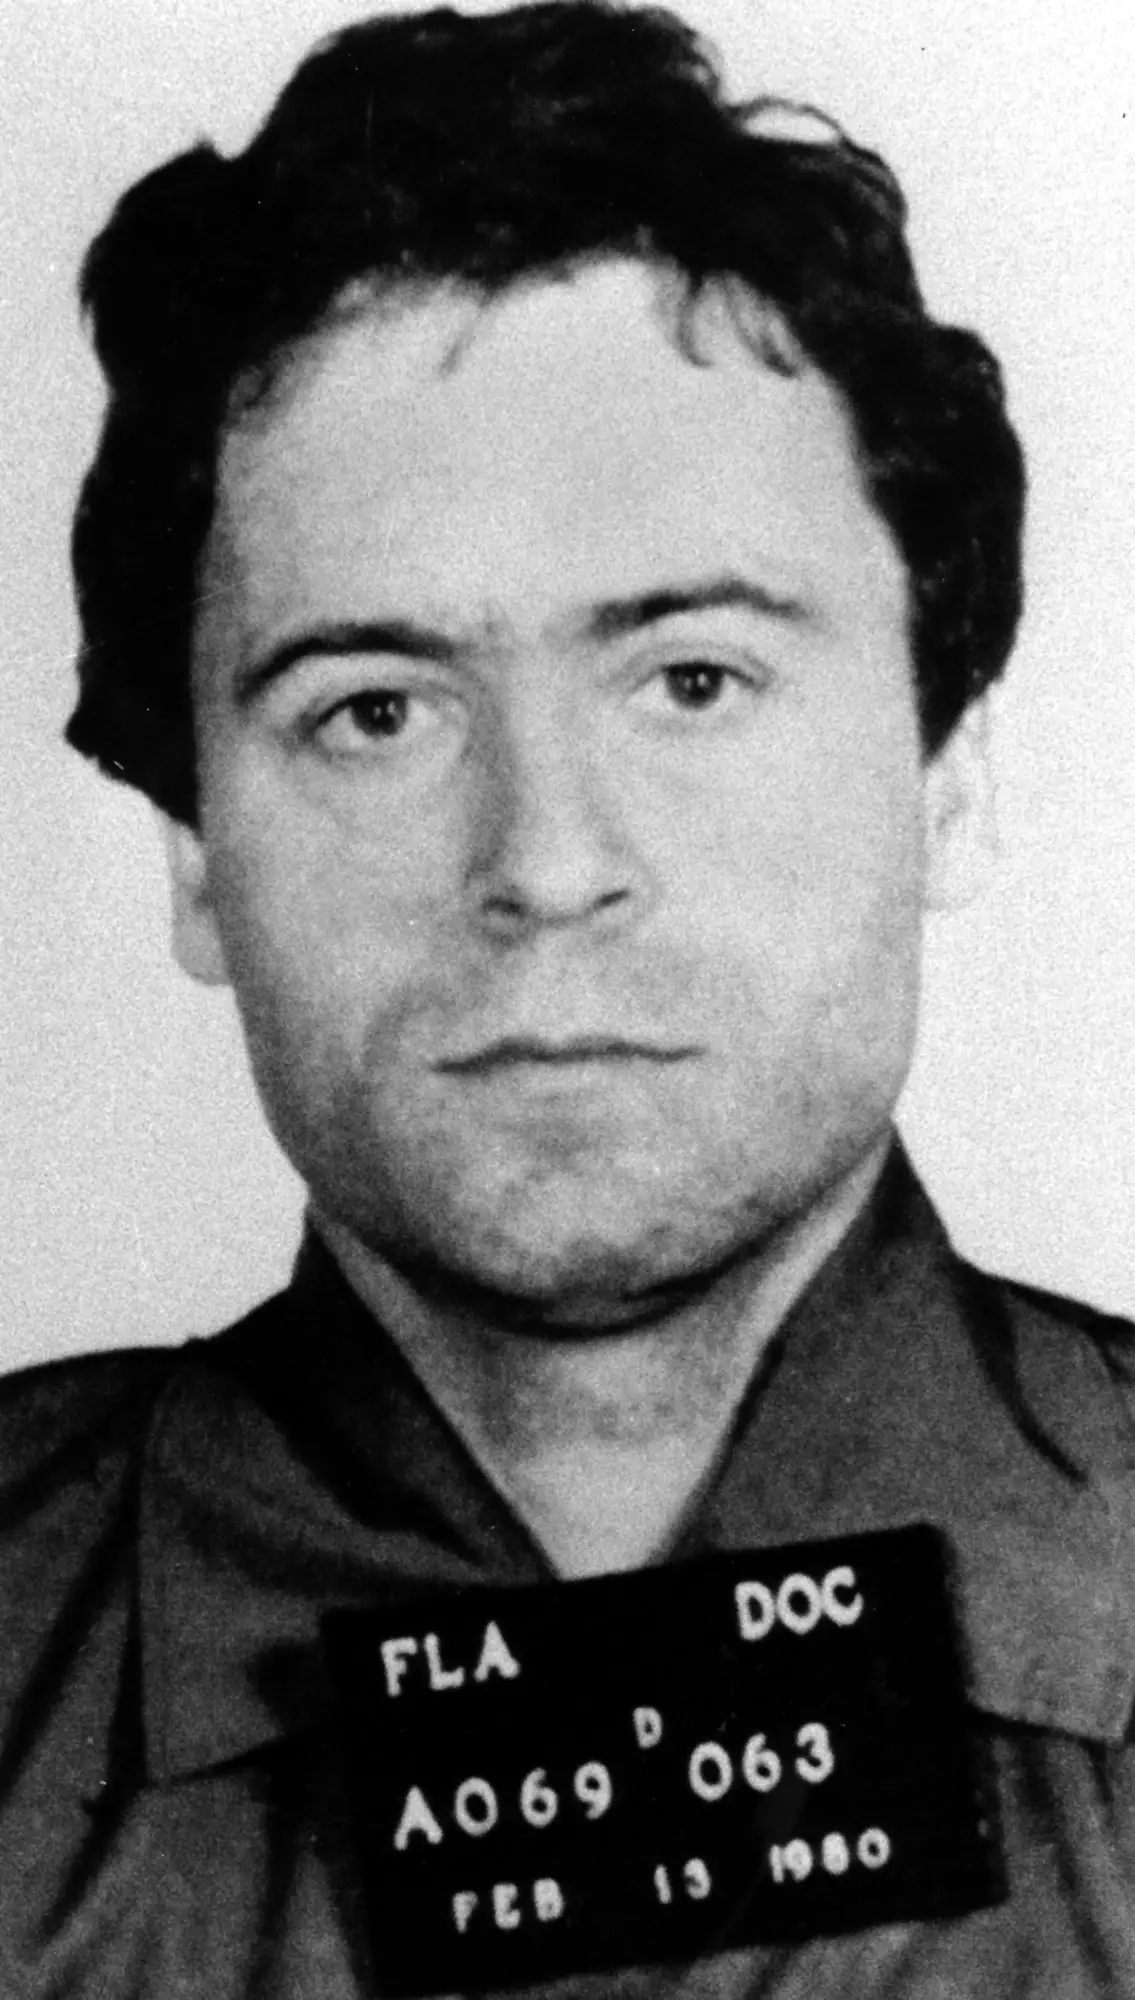 Ted Bundy went on to admit to 30 murderers, but people think there are likely more. (